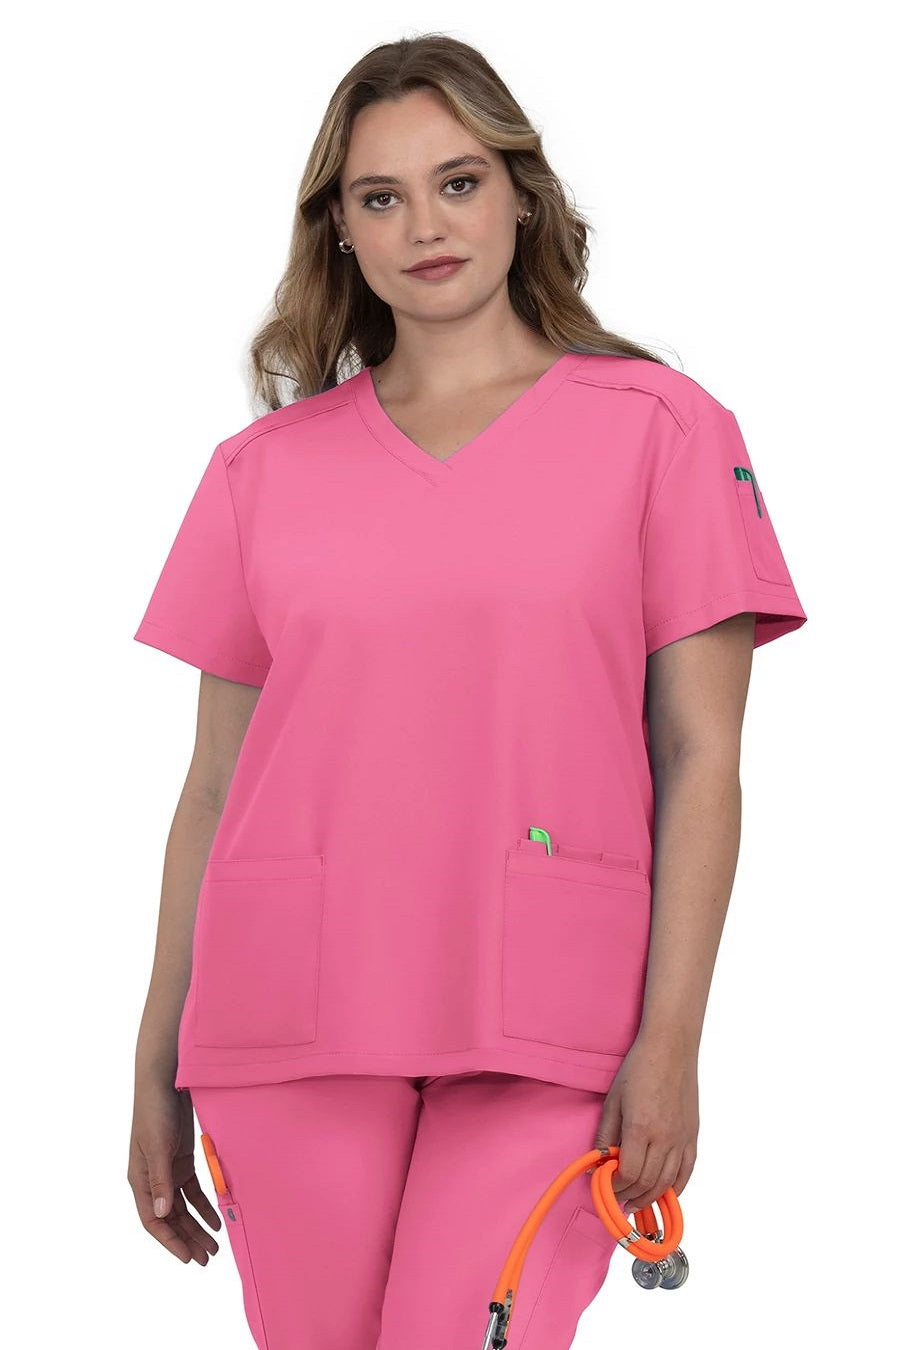 koi Scrub Top Cureology Cardi in Carnation at Parker's Clothing and Shoes.